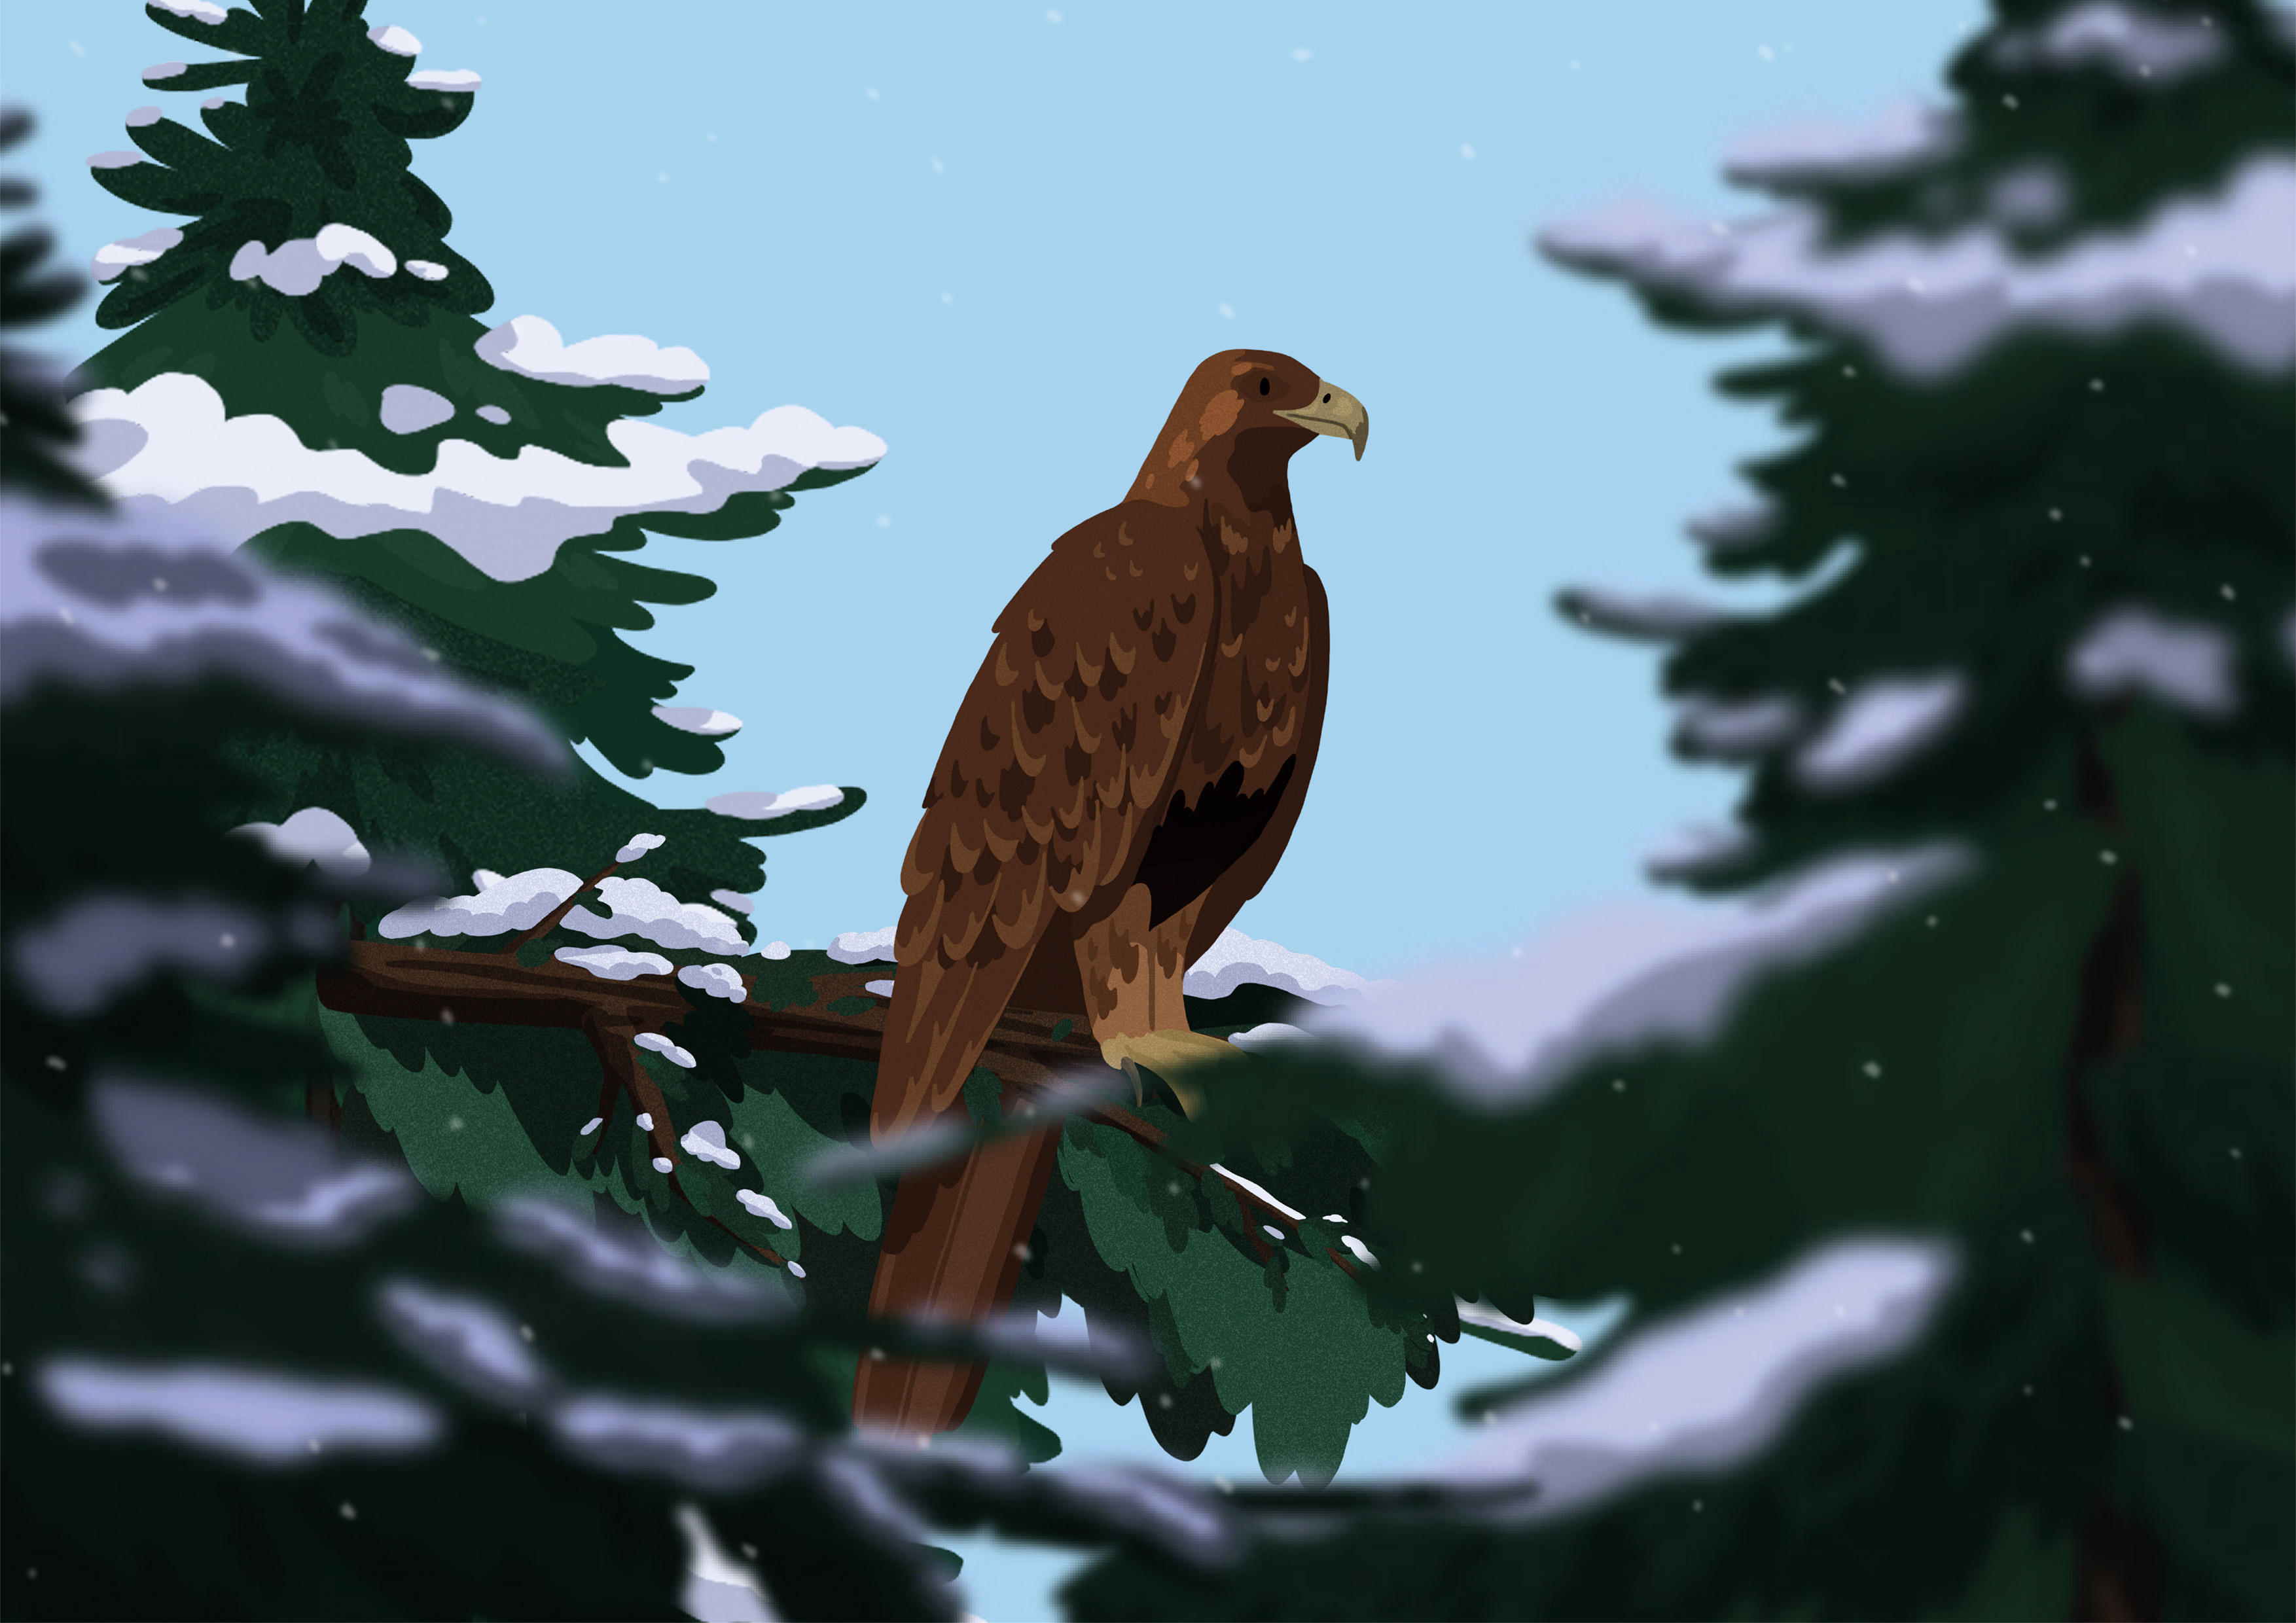 Illustration of a Golden Eagle perched on a Pine branch that has a layer of snow, featuring blurry, snowy pine trees in the foreground.